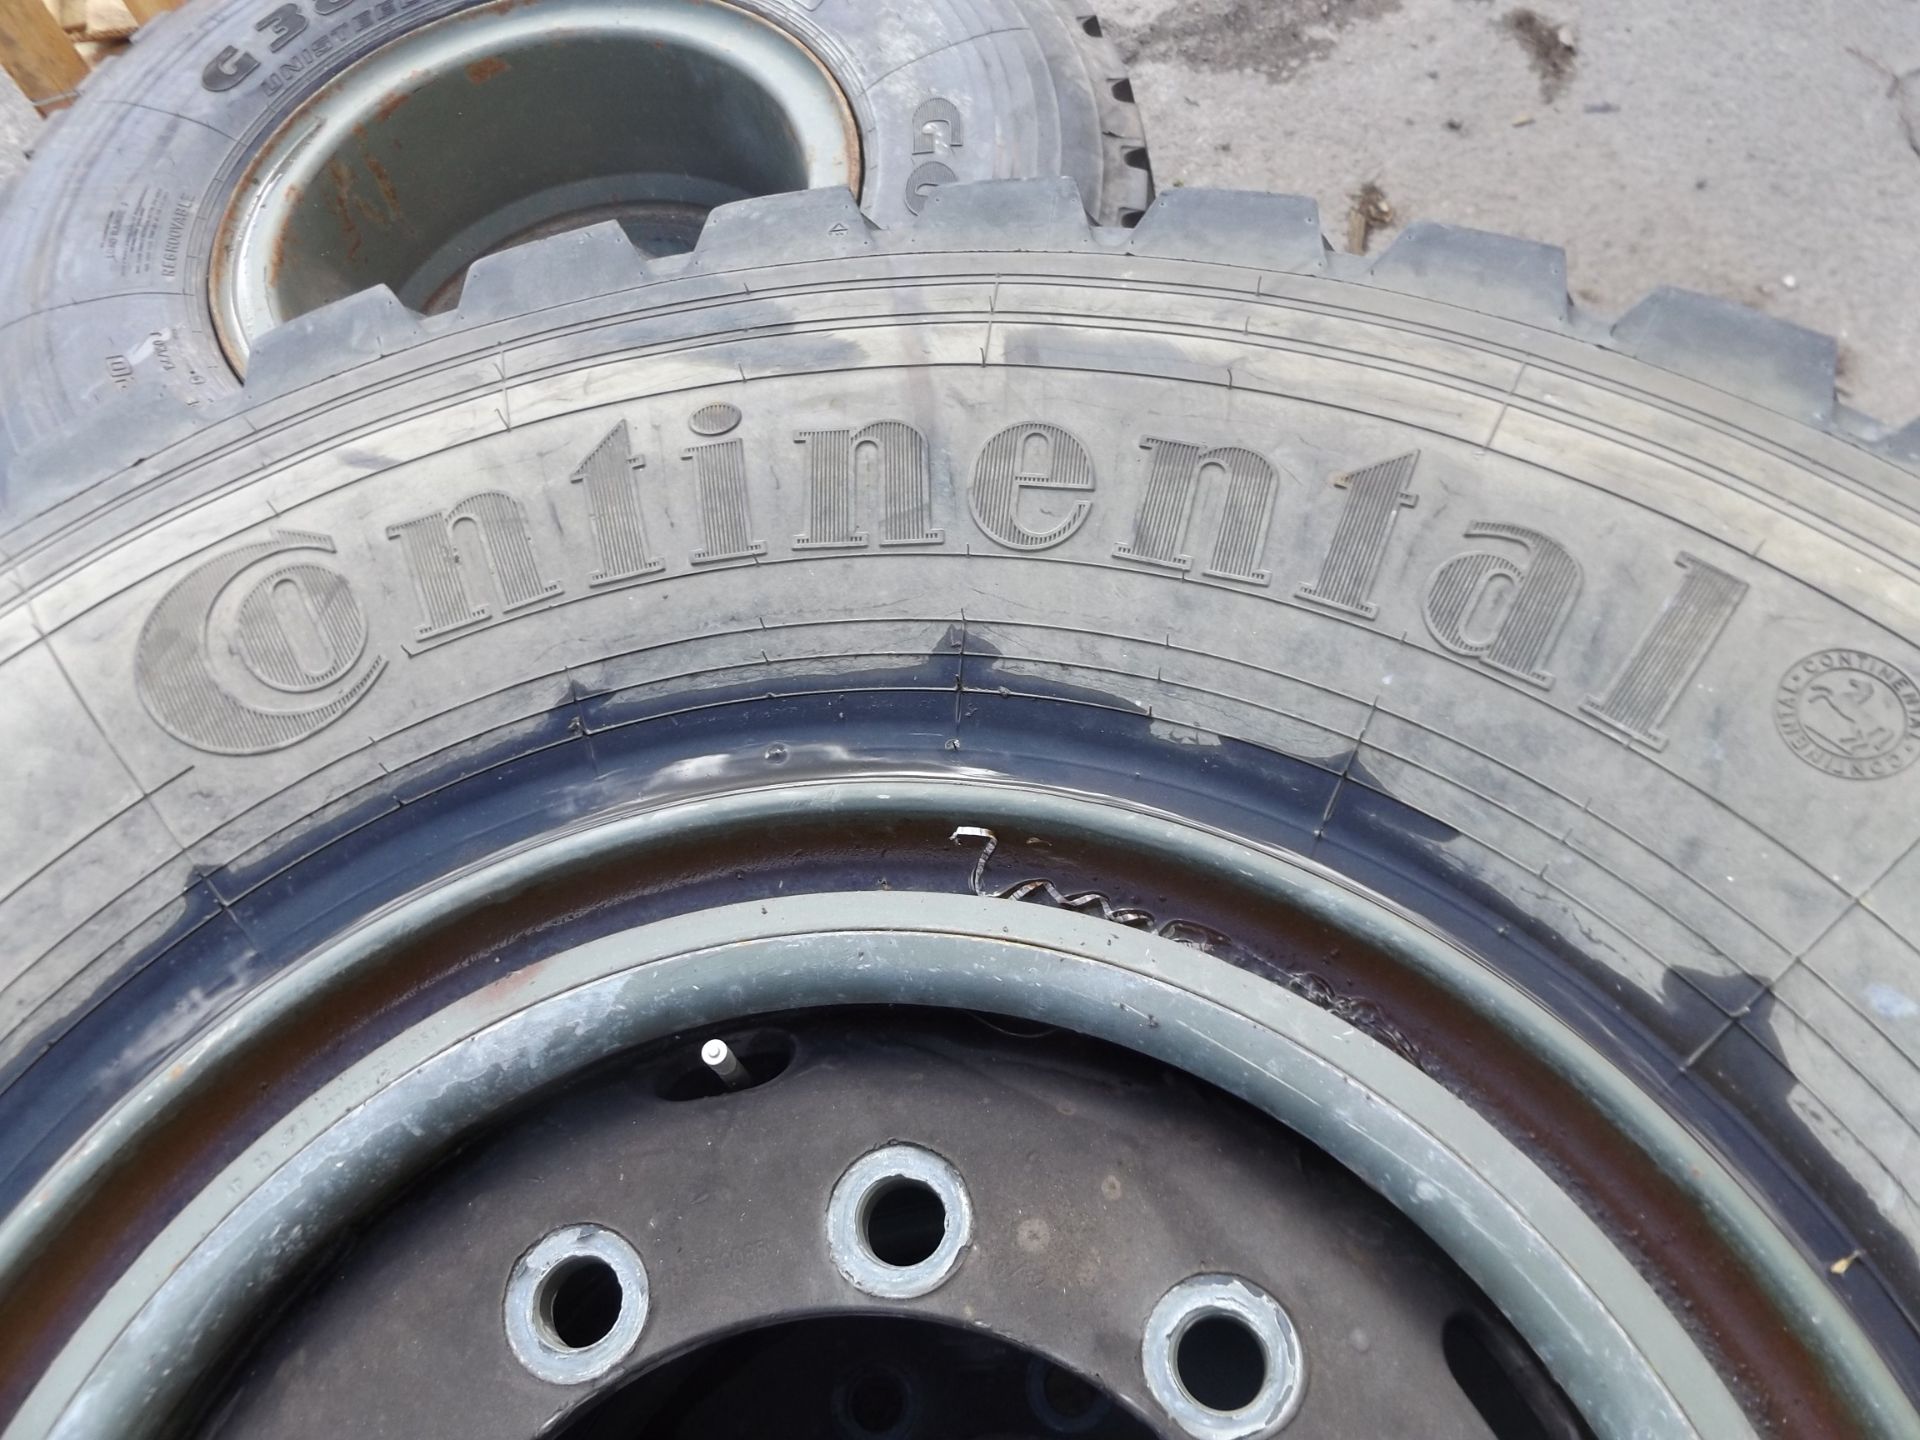 2 x Continental 14.00 R20 Tyres Complete With 10 Stud Rims and Run Flat Assys - Image 3 of 6